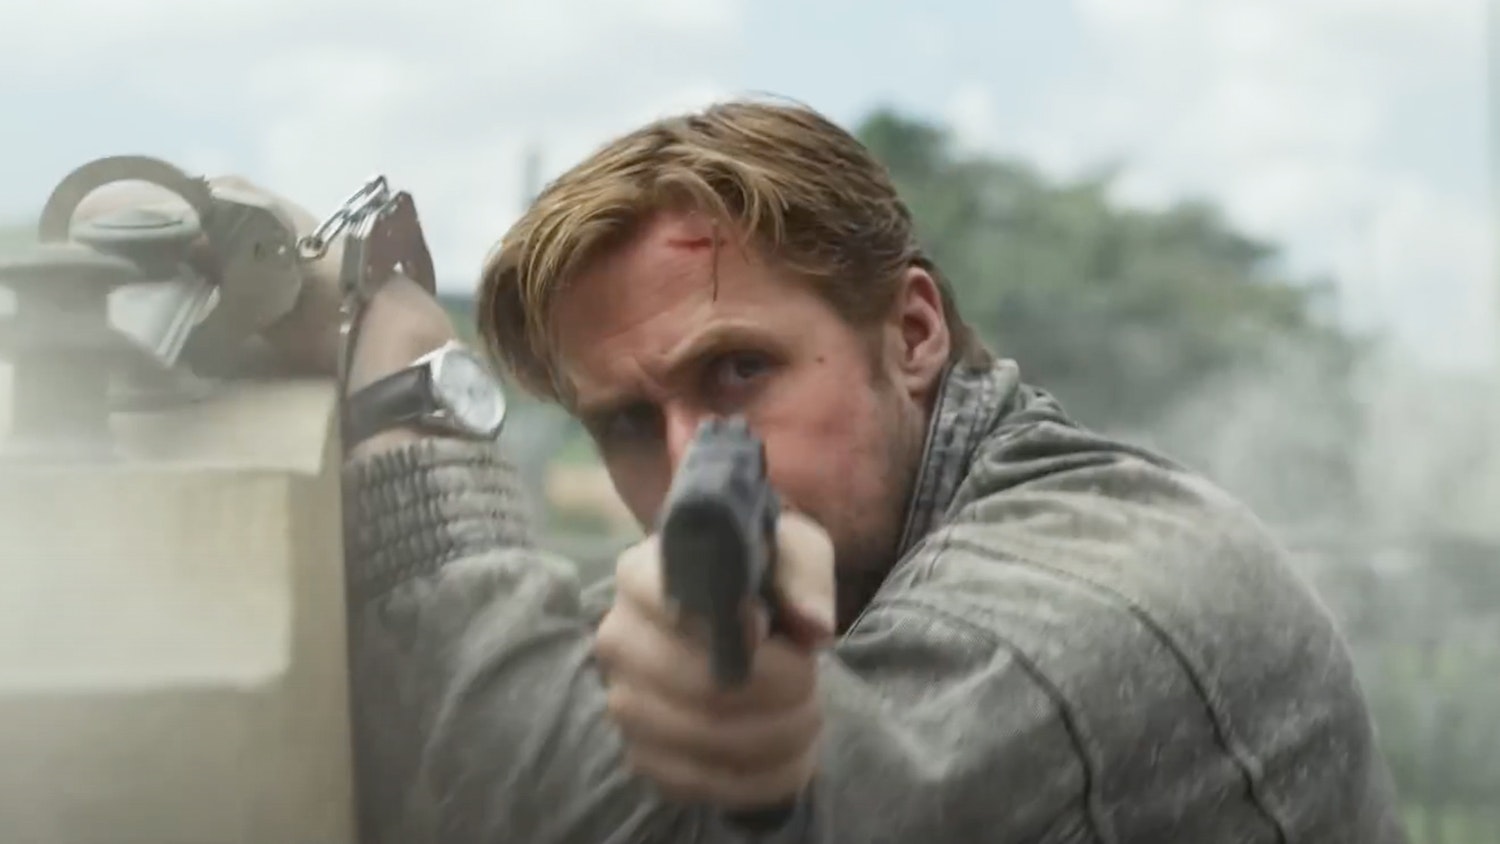 The Gray Man - Ryan Gosling Movie - Official Trailer  Ryan Gosling, Ana de  Armas, and Chris Evans star in the first trailer for the Russo brothers' The  Gray Man 